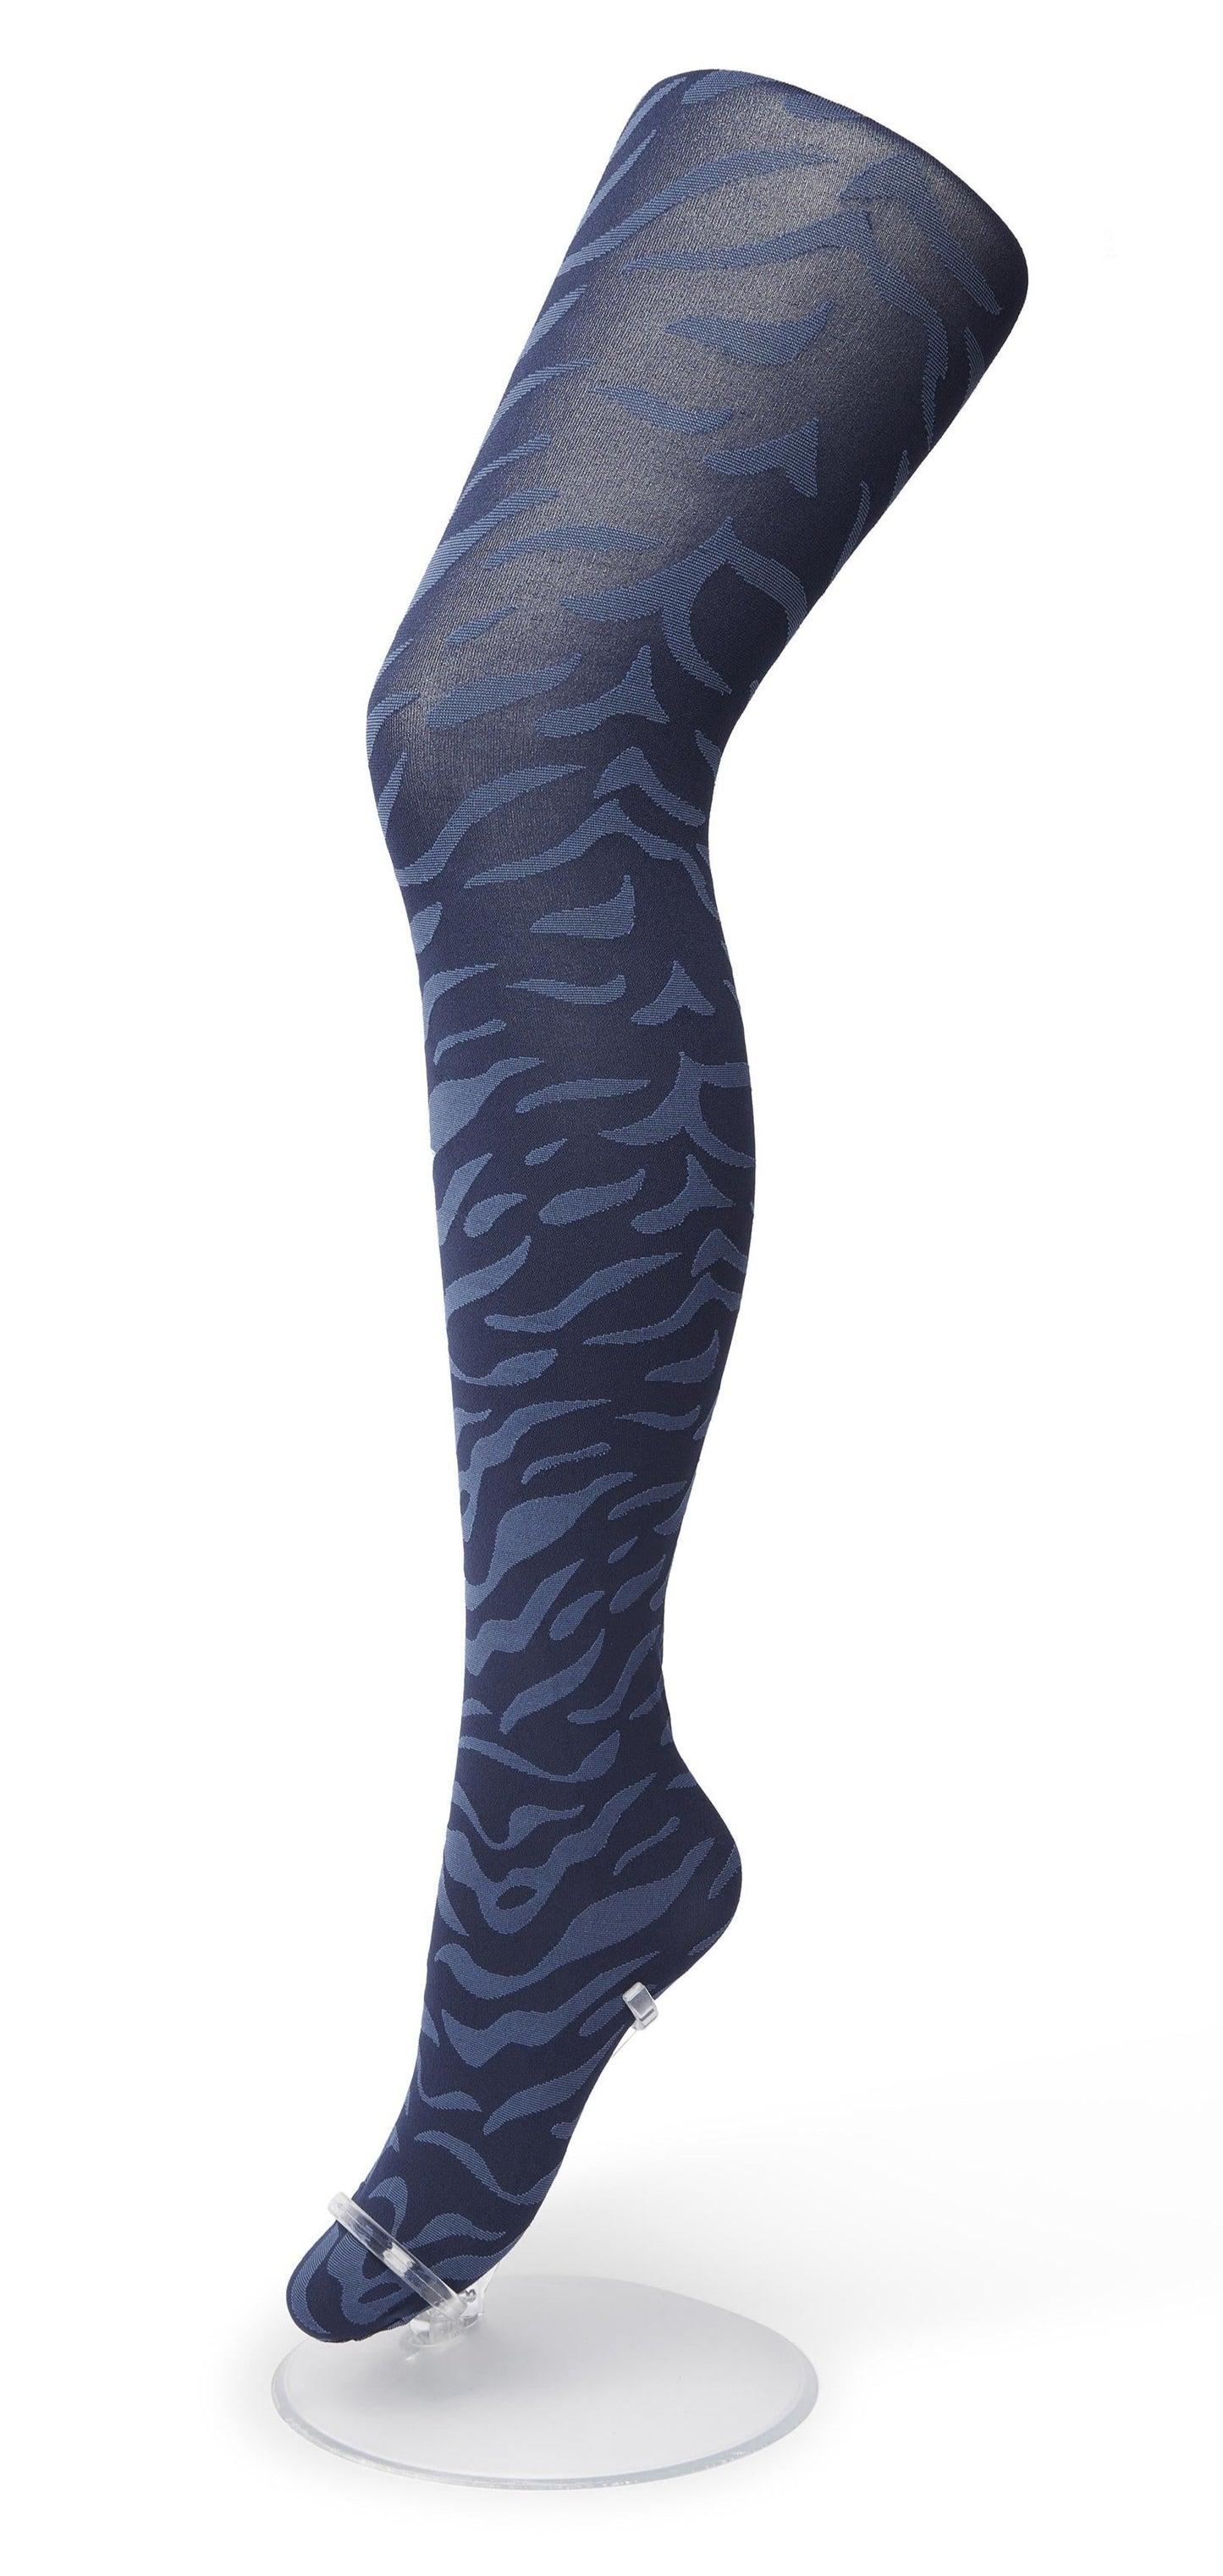 Bonnie Doon Zebra Tights - Ultra opaque blue (bering sea) fashion tights with a pale pink woven wavy style zebra pattern, flat seams and gusset.